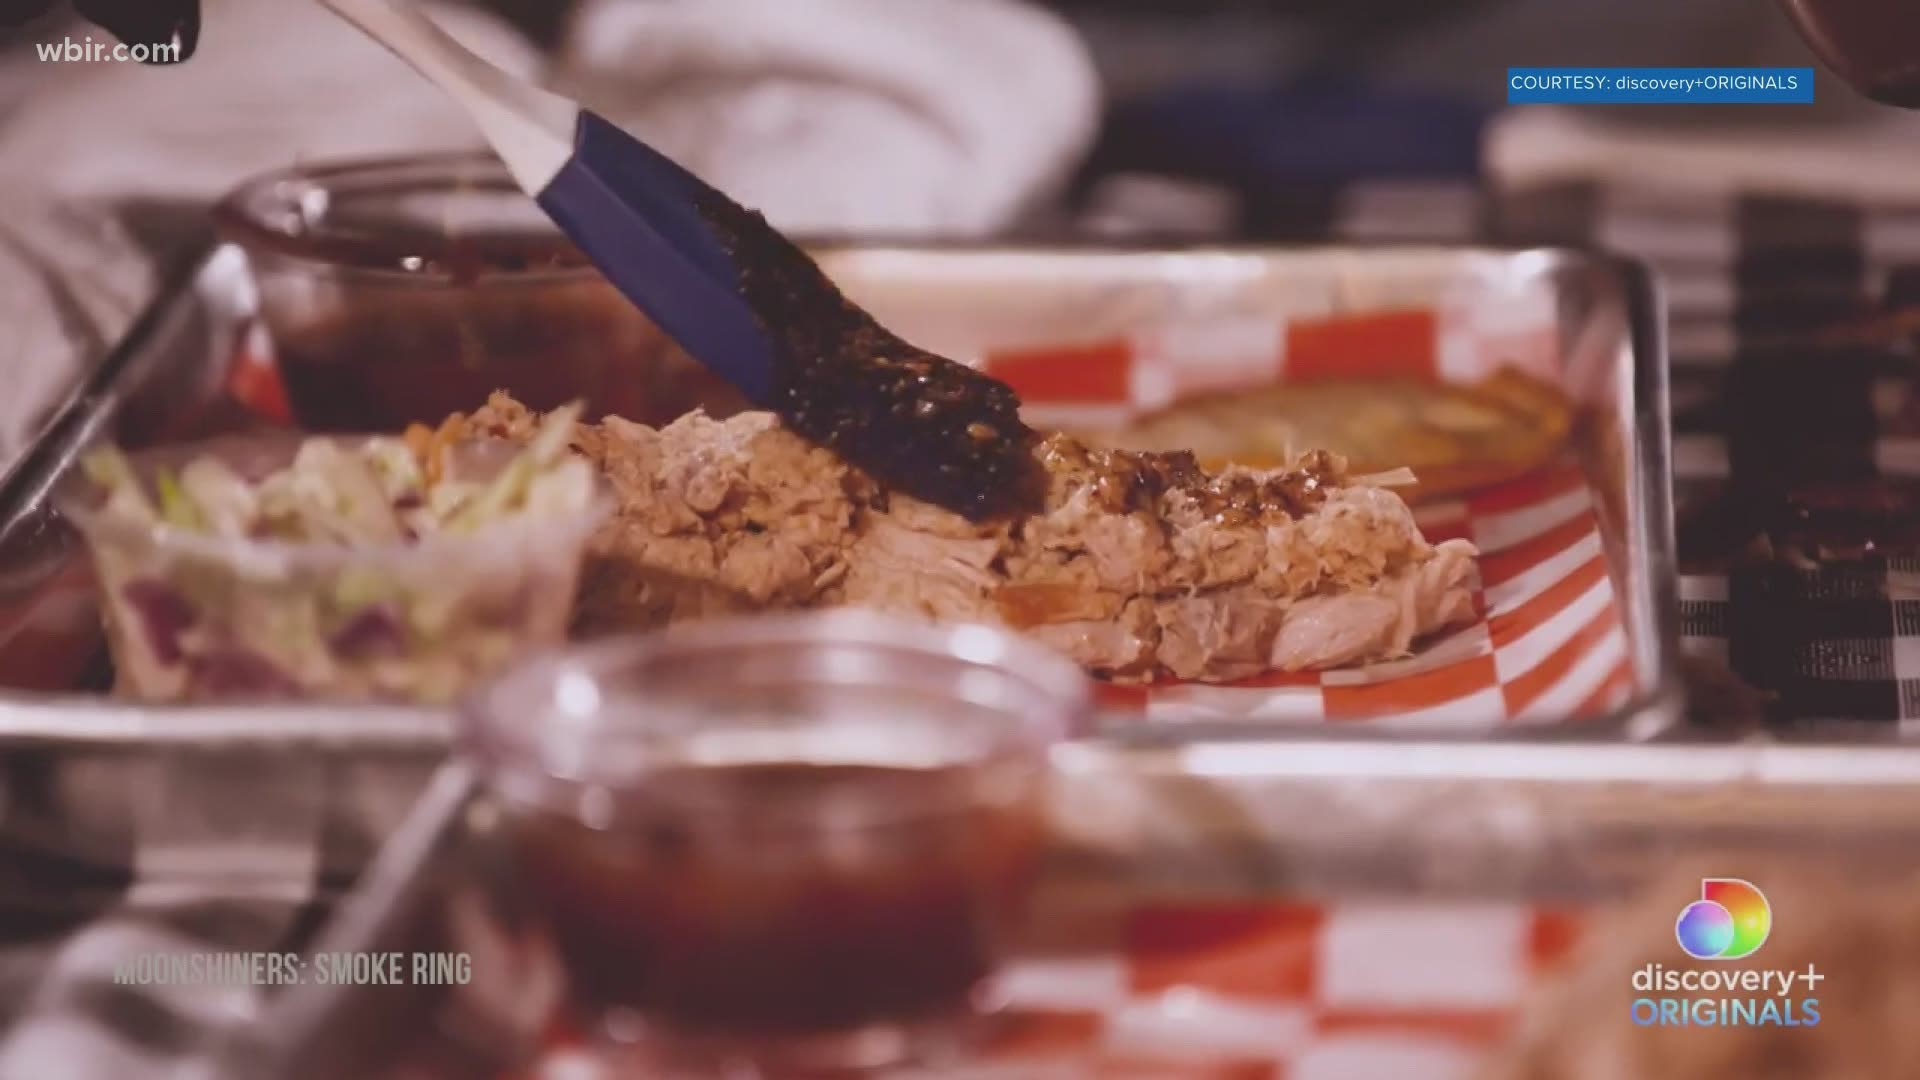 John Caddell, owner of Johnboy's BBQ in Morgan County, is one of the first competitors on a new Discovery+ show.